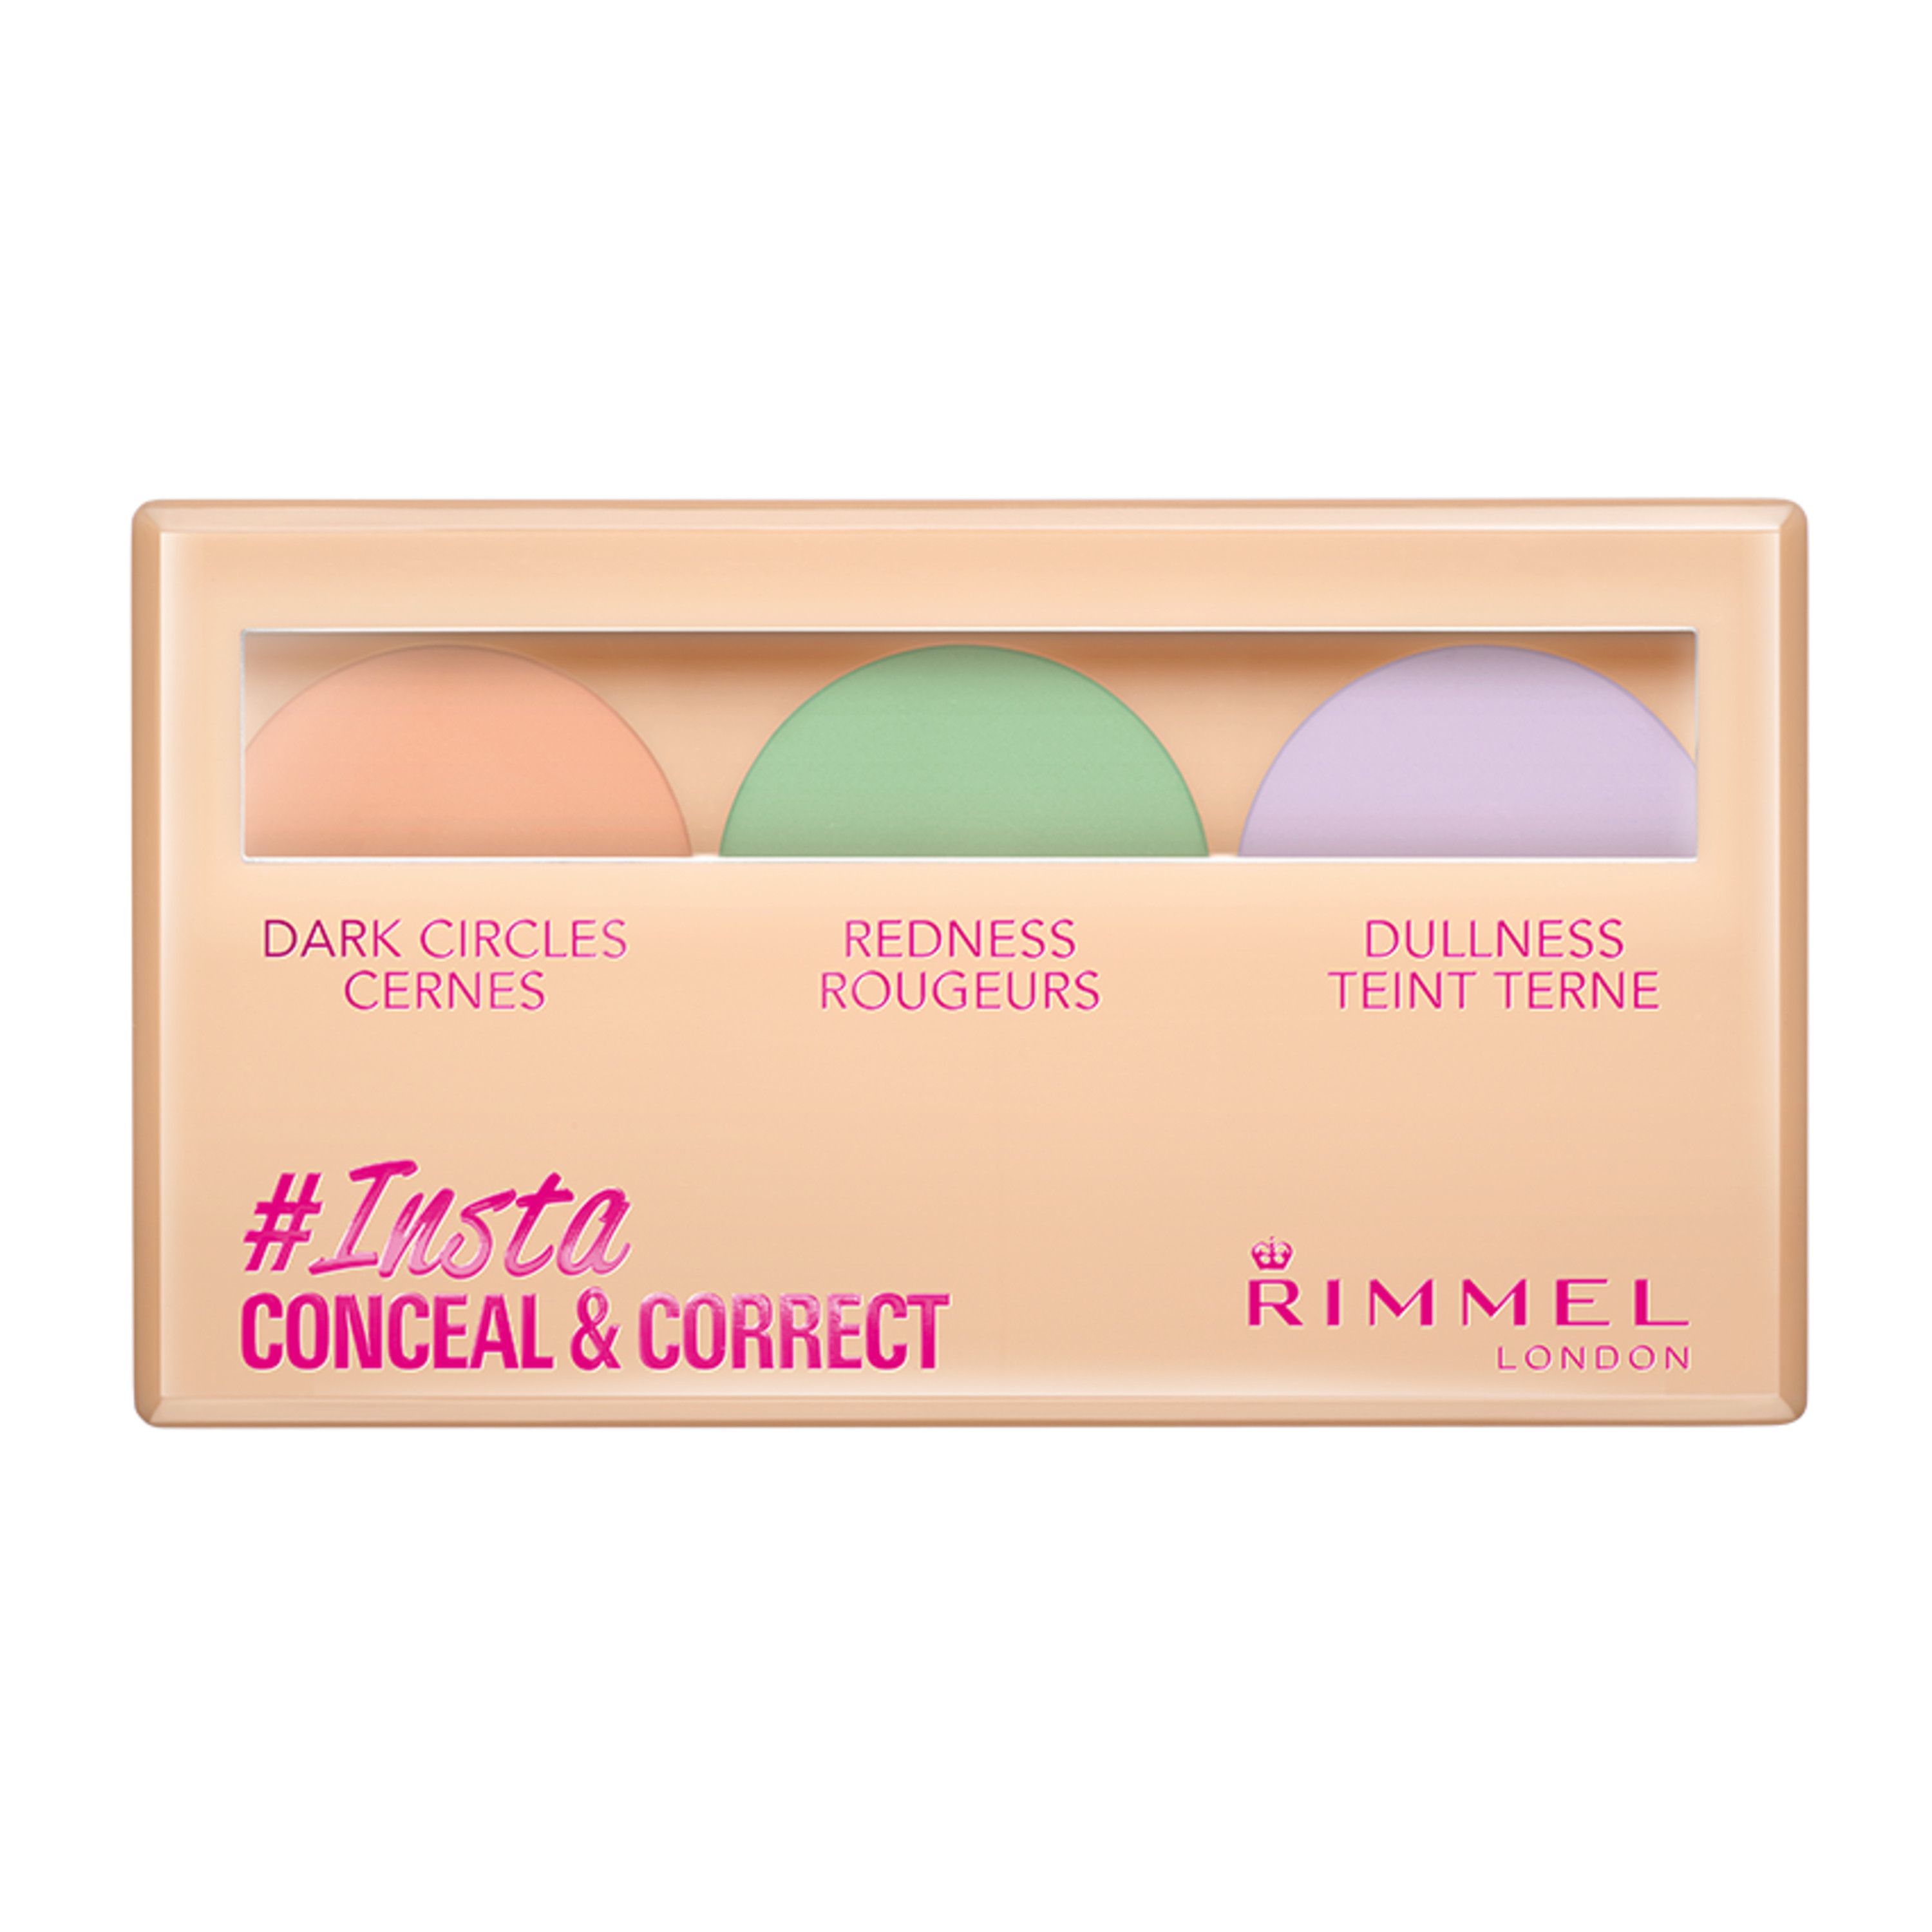 Rimmel Insta Conceal & Correct Palette in 001 Universal - image 1 of 7